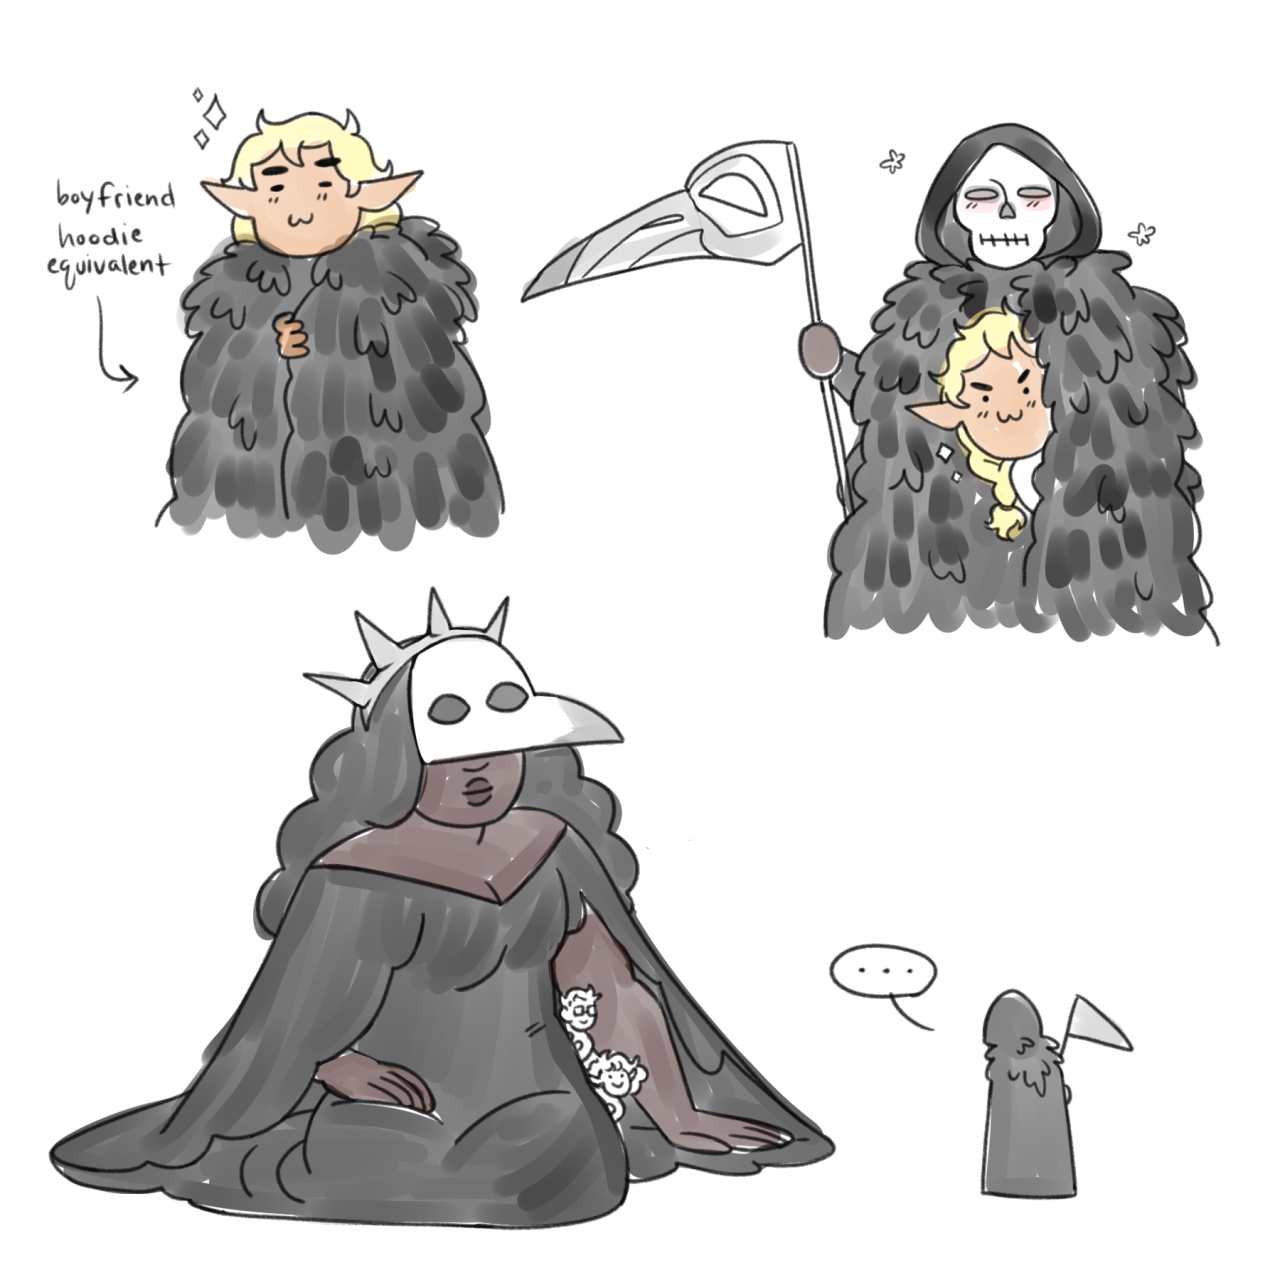 herbgerblin:[id: three doodles. Top left is Taako, an elven man wearing a dark, feathered cloak. There are sparkles near his head and a caption pointing to him that reads,” boyfriend hoodie equivalent.” Top right shows Kravitz, the grim reaper, in